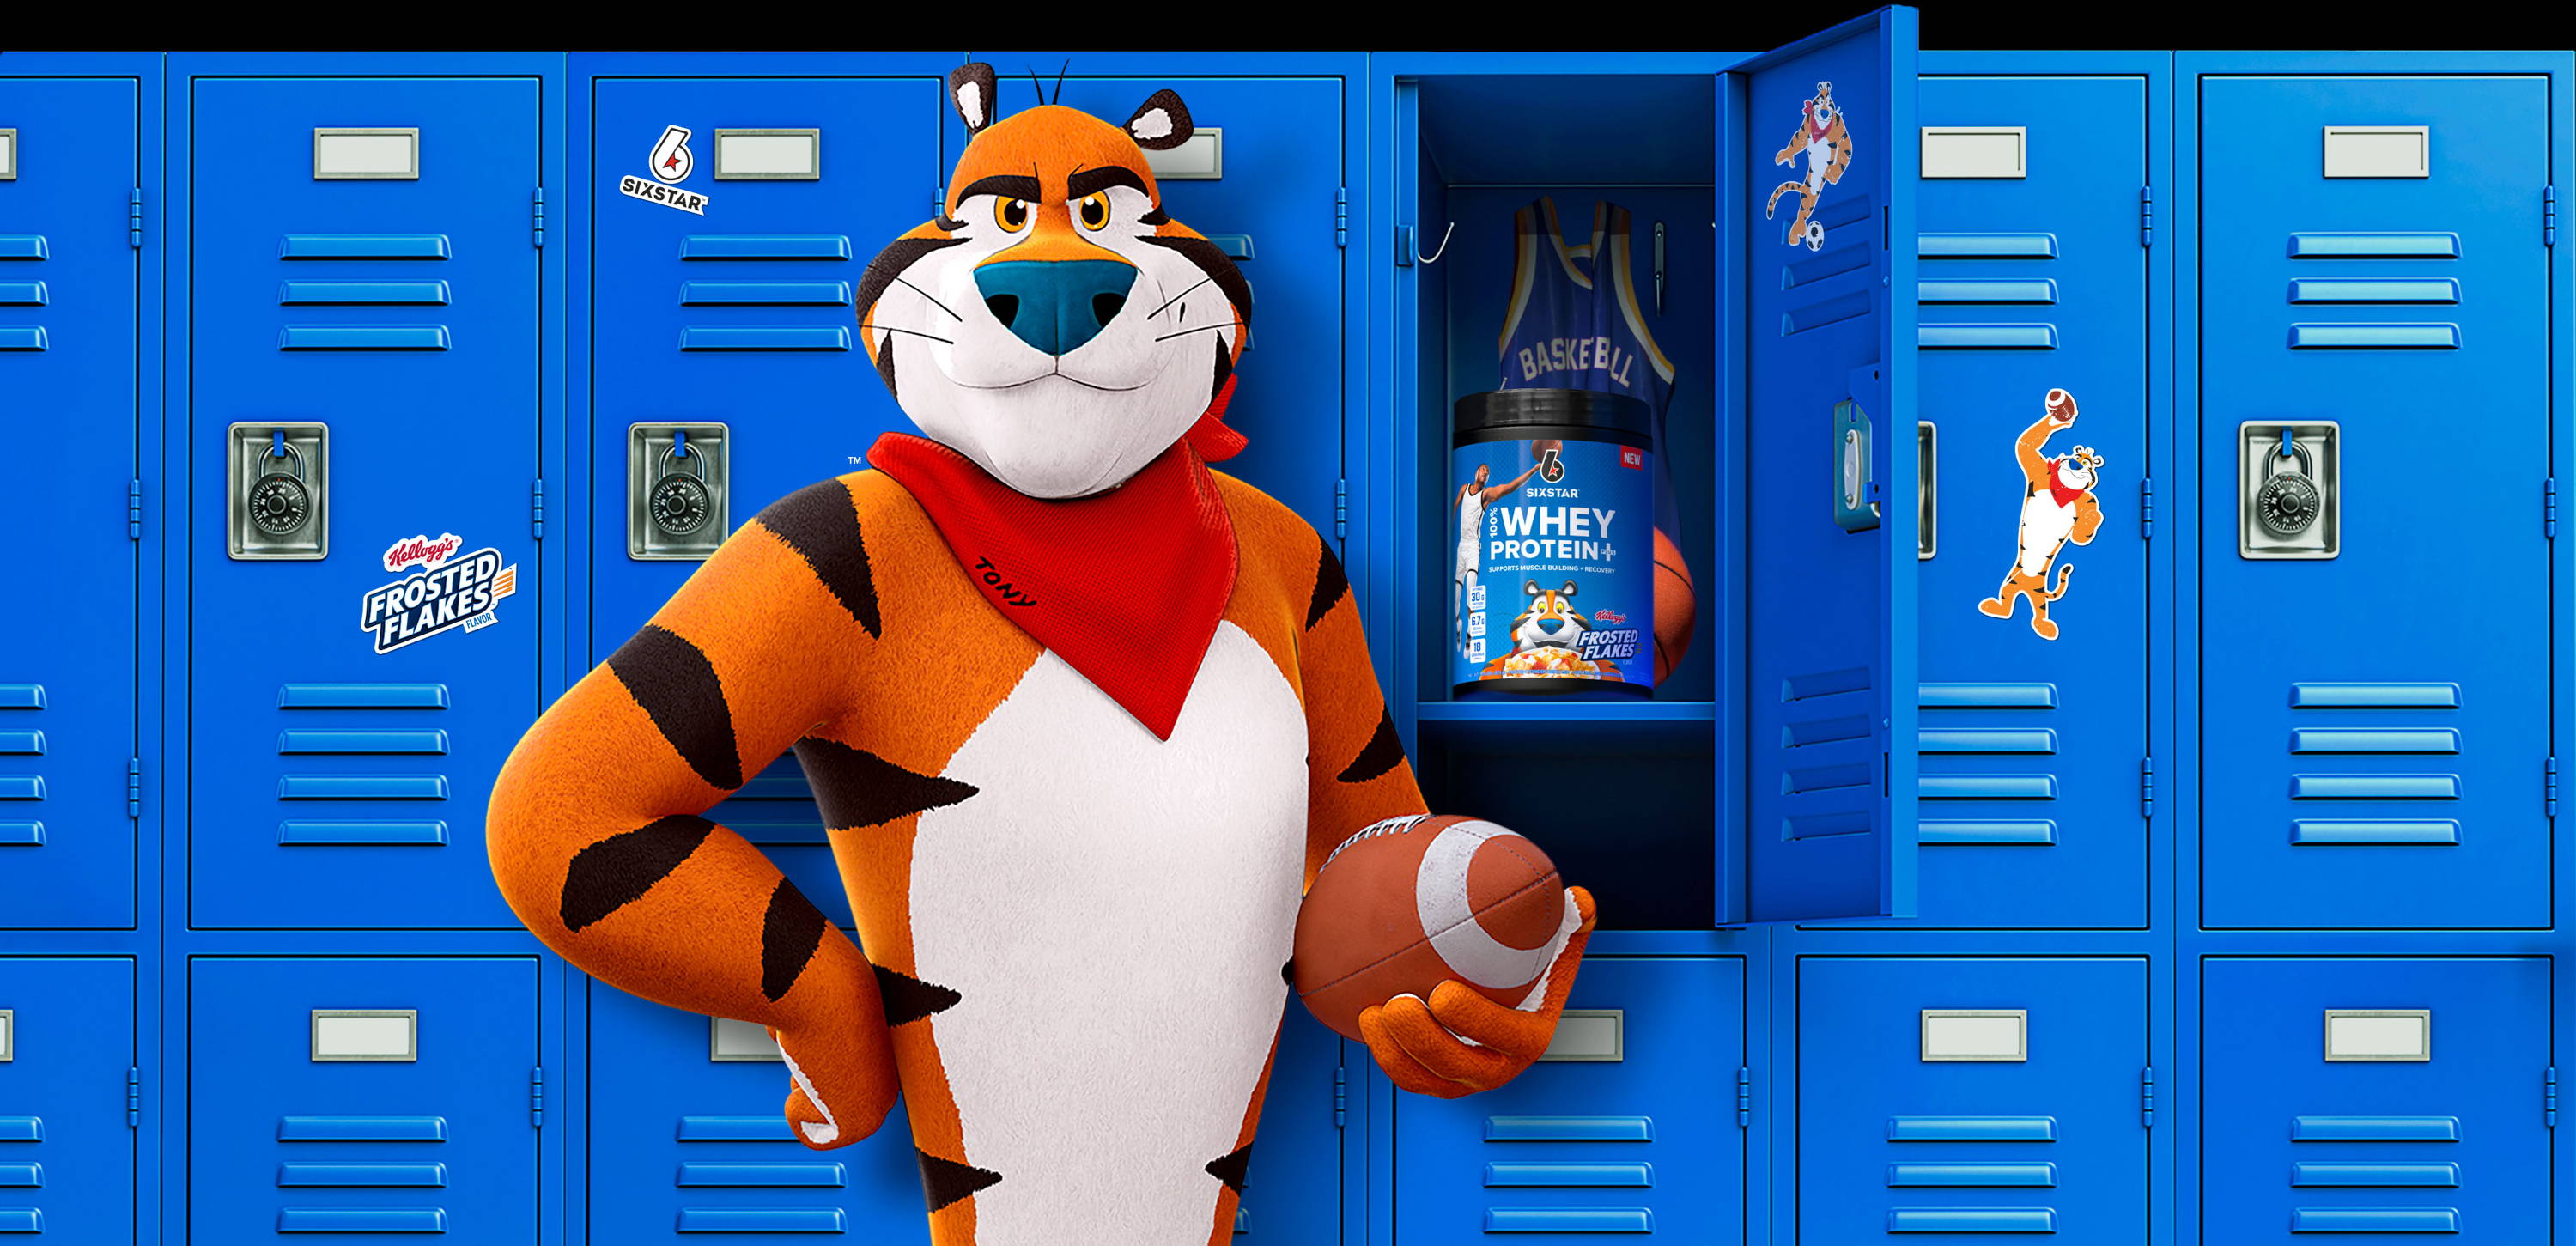 In high school with SIXSTAR Kellogg's Frosted Flakes® 100% Whey Protein Plus